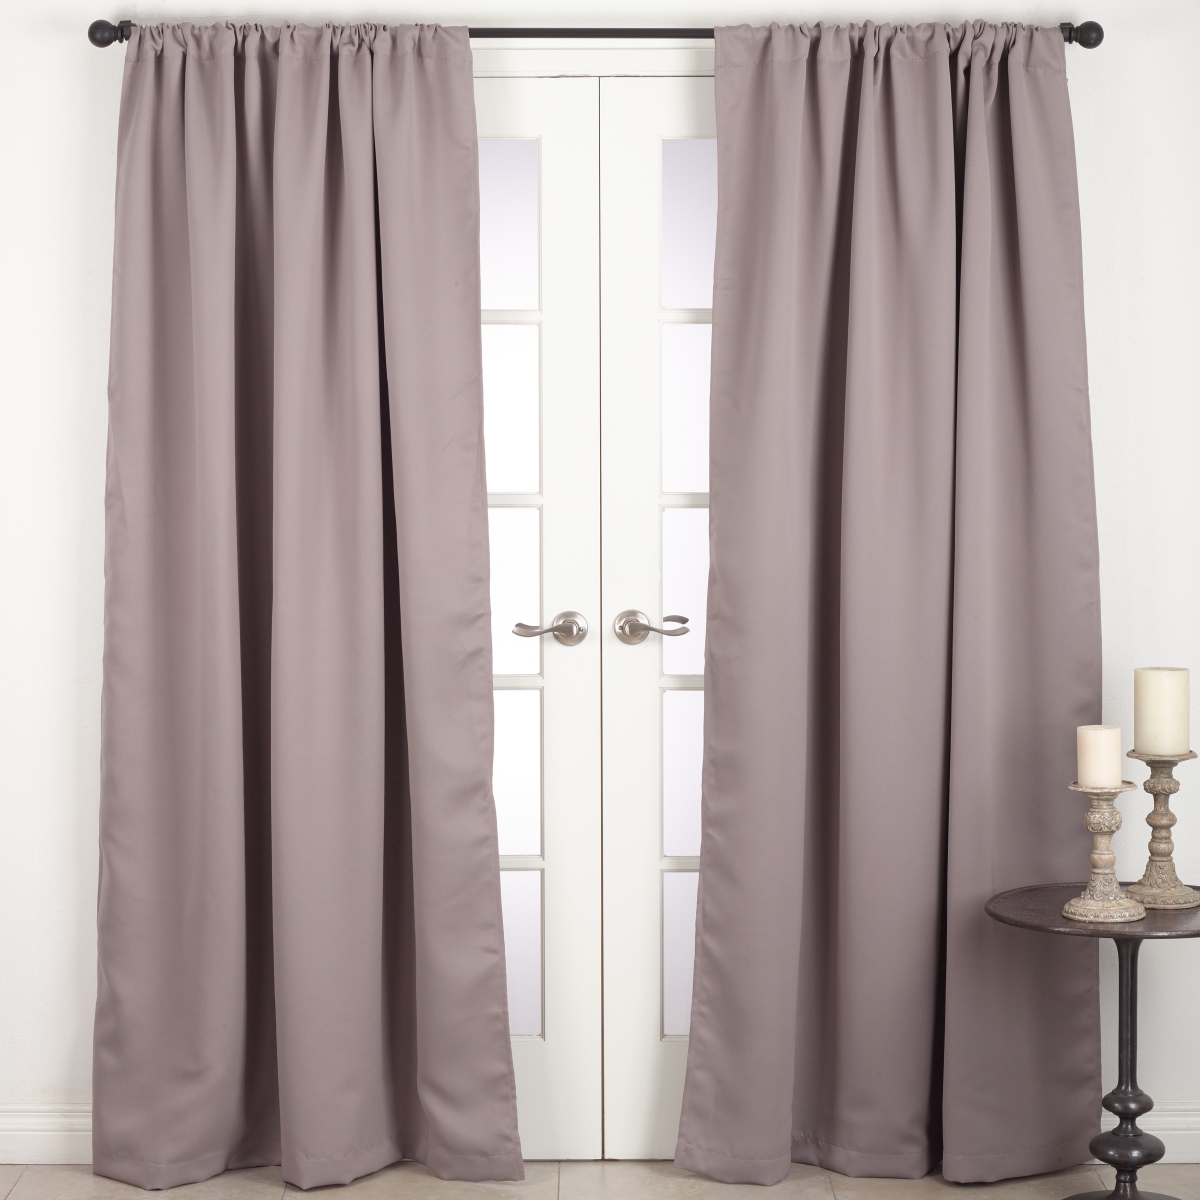 C115.t5496 54 X 96 In. Solid Rod Pocket Blackout Window Curtain Panel, Taupe